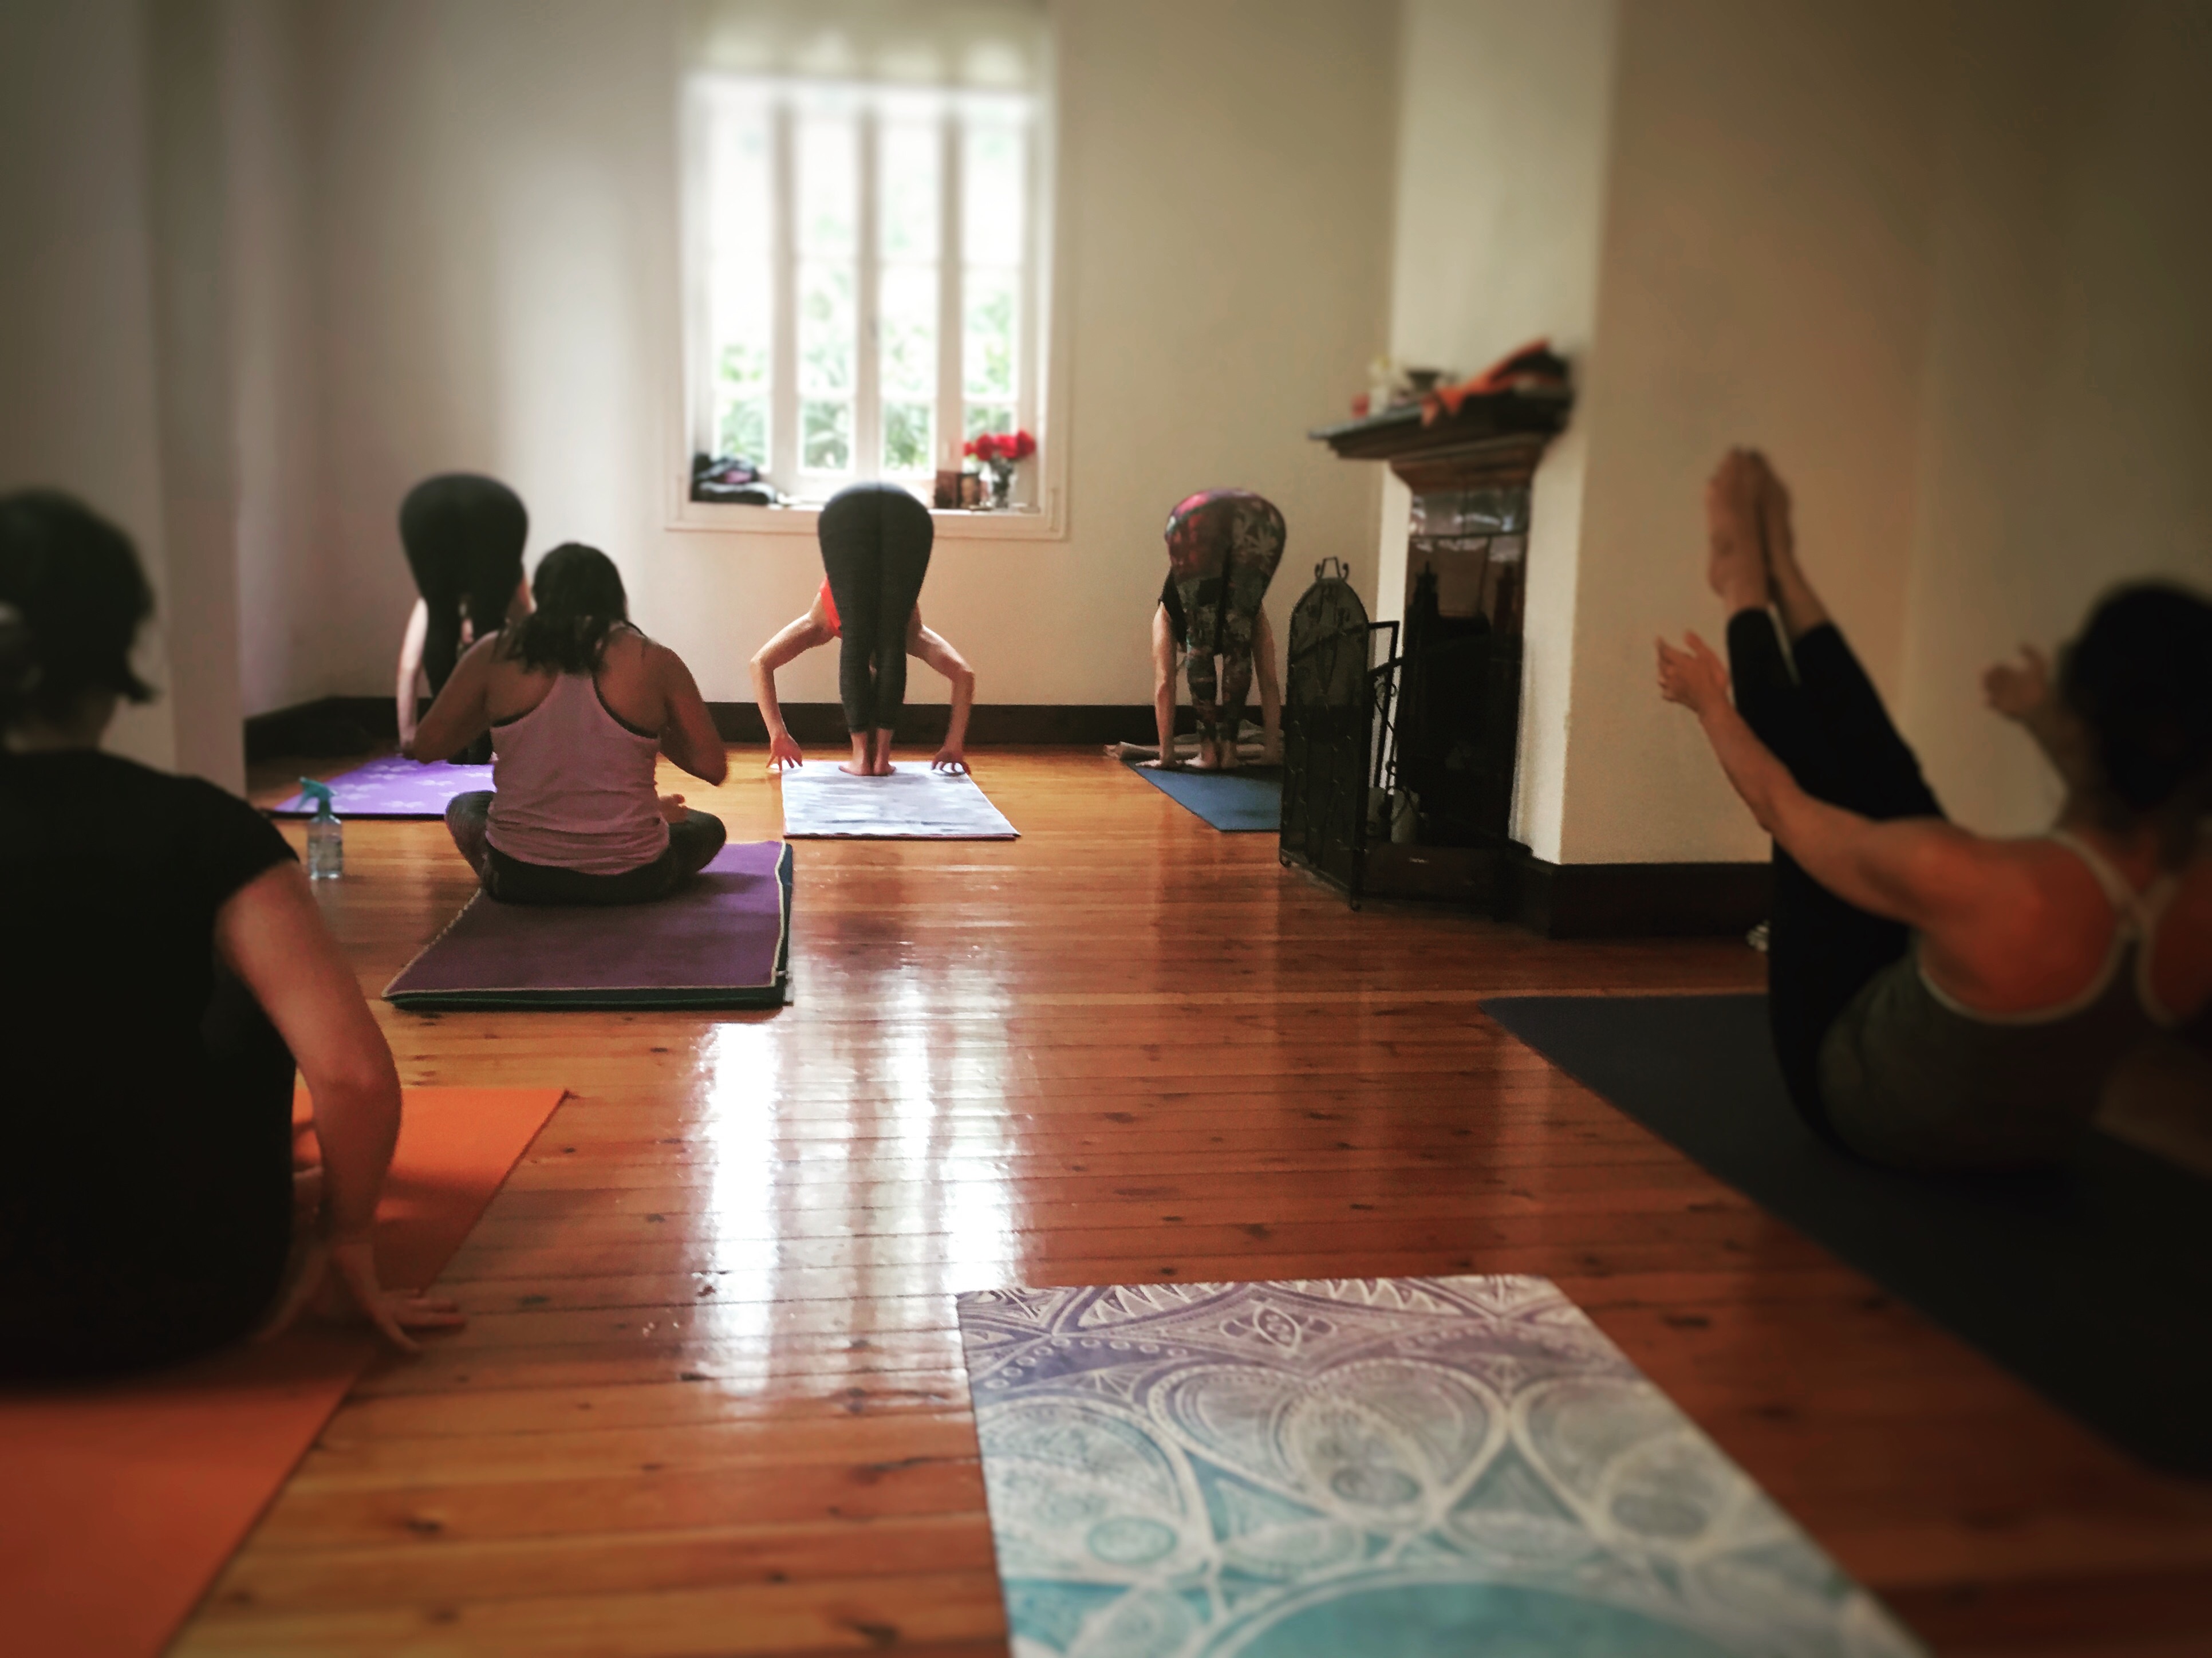 Why is ashtanga so tough? …maybe it's not as tough as we think